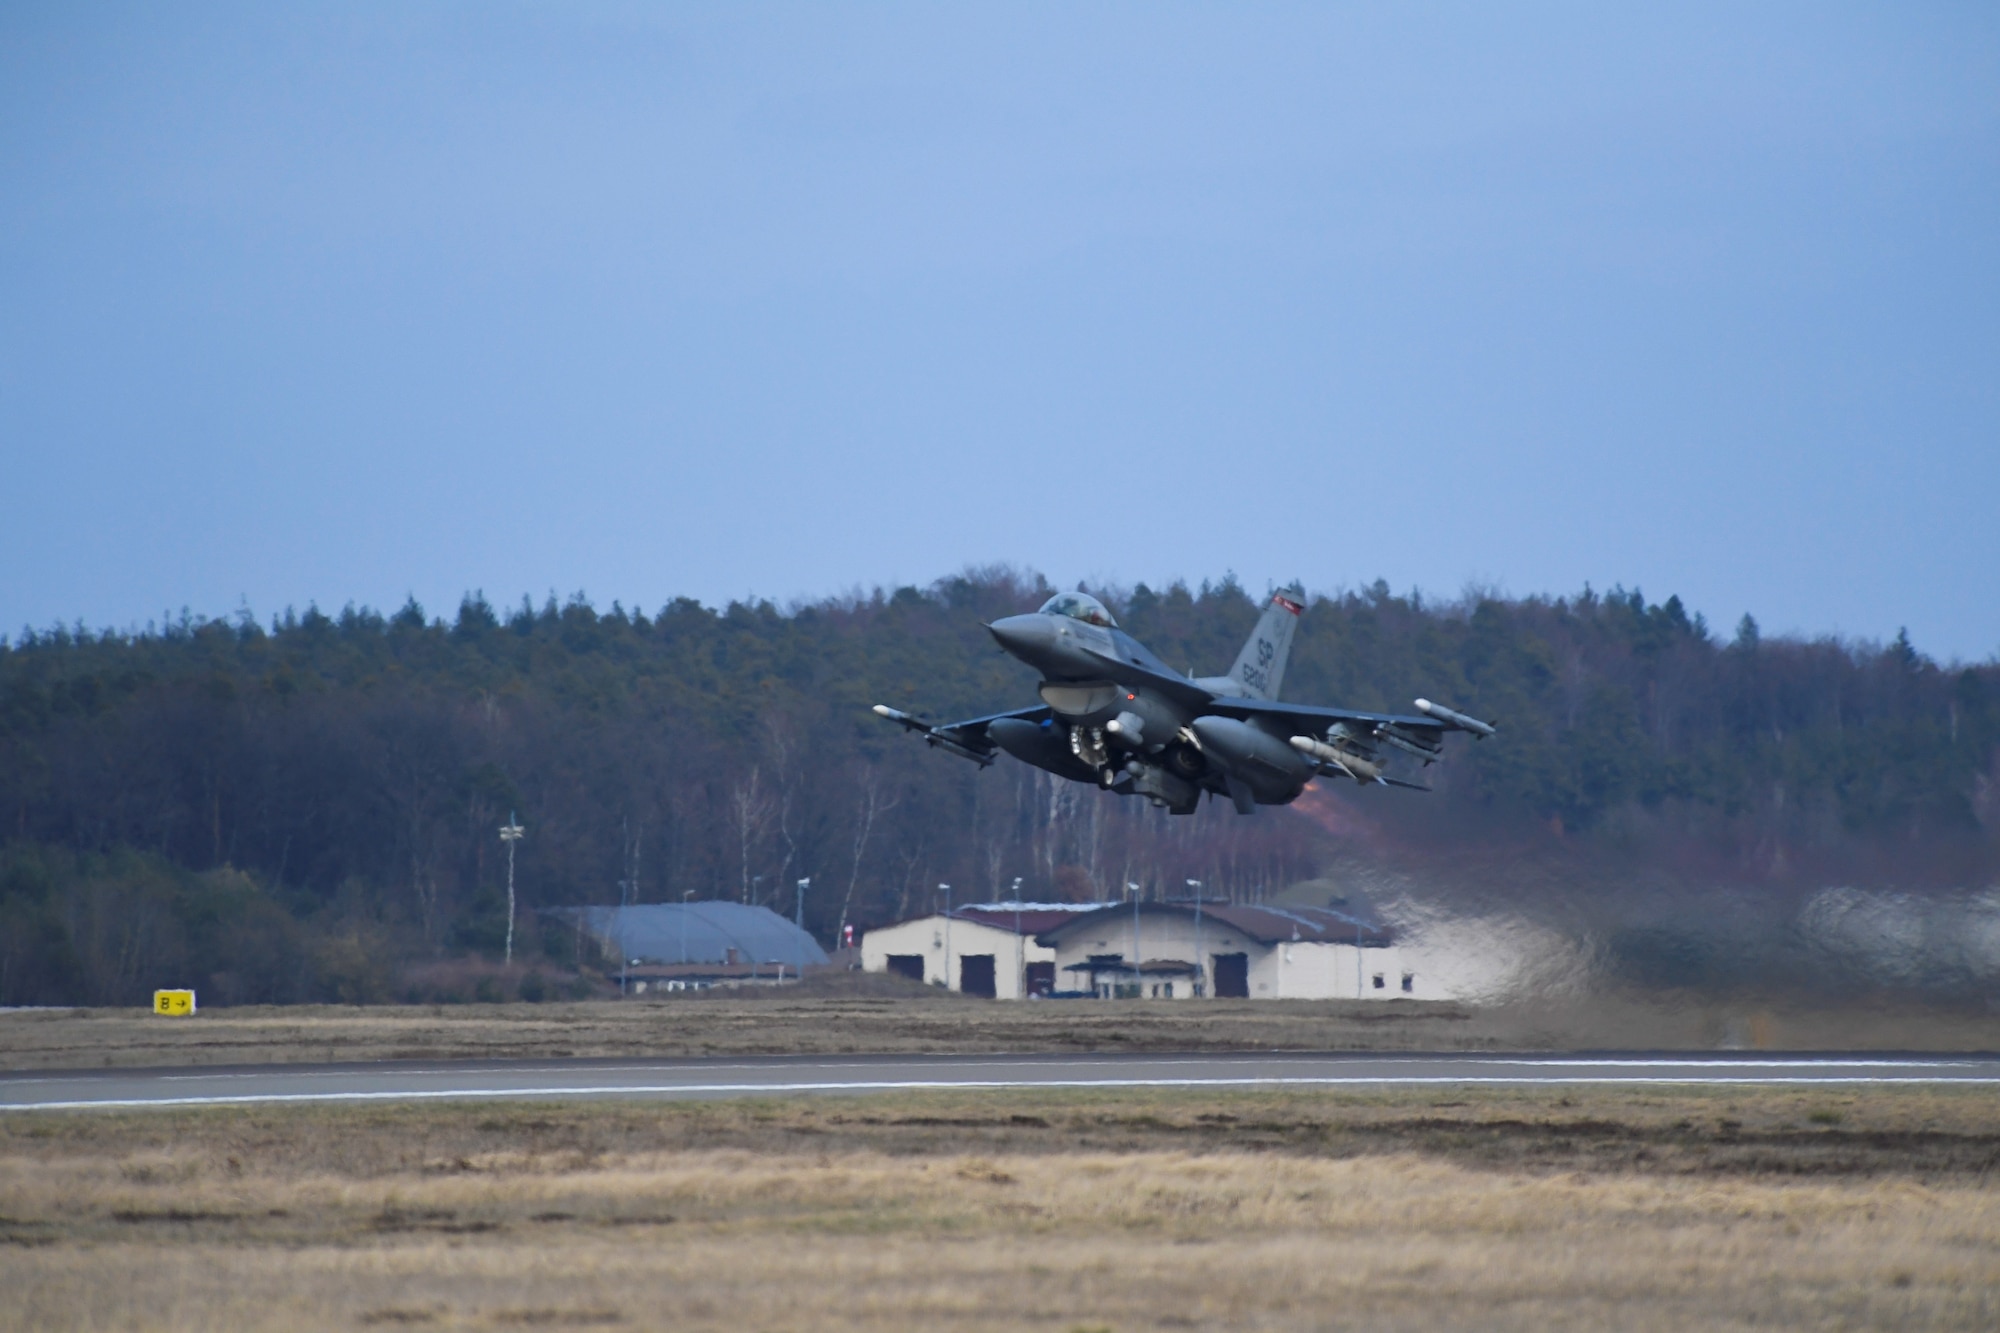 A U.S. Air Force F-16 Fighting Falcon aircraft from the 480th Fighter Squadron takes off during an Agile Combat Employment exercise at Ramstein Air Base, Germany, March 23, 2021. The exercise, which ran from March 22-26, featured jets flying two missions a day. (U.S. Air Force photo by Tech. Sgt. Warren D. Spearman Jr.)